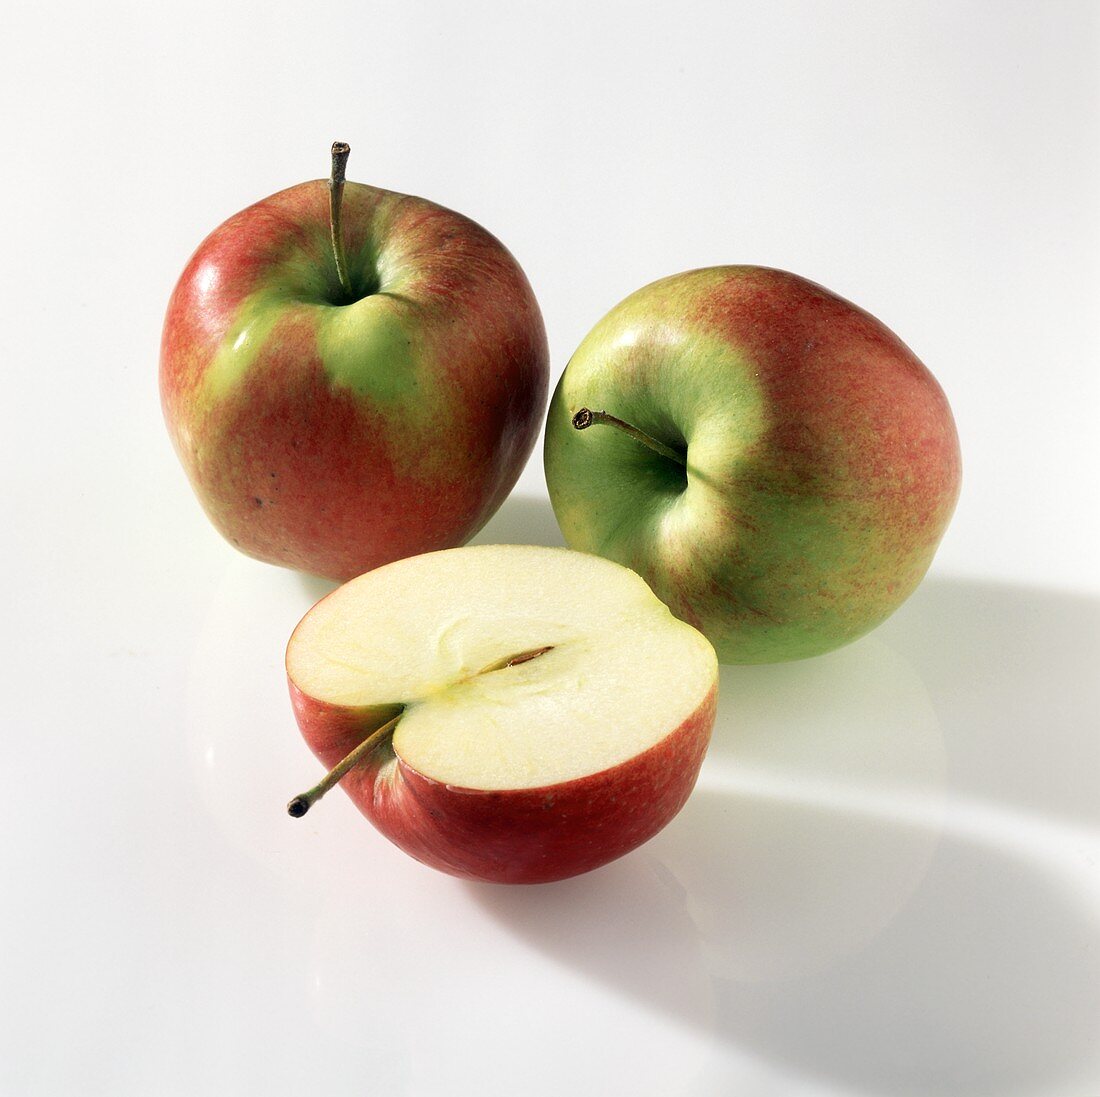 Half and two whole Jonagold apples 